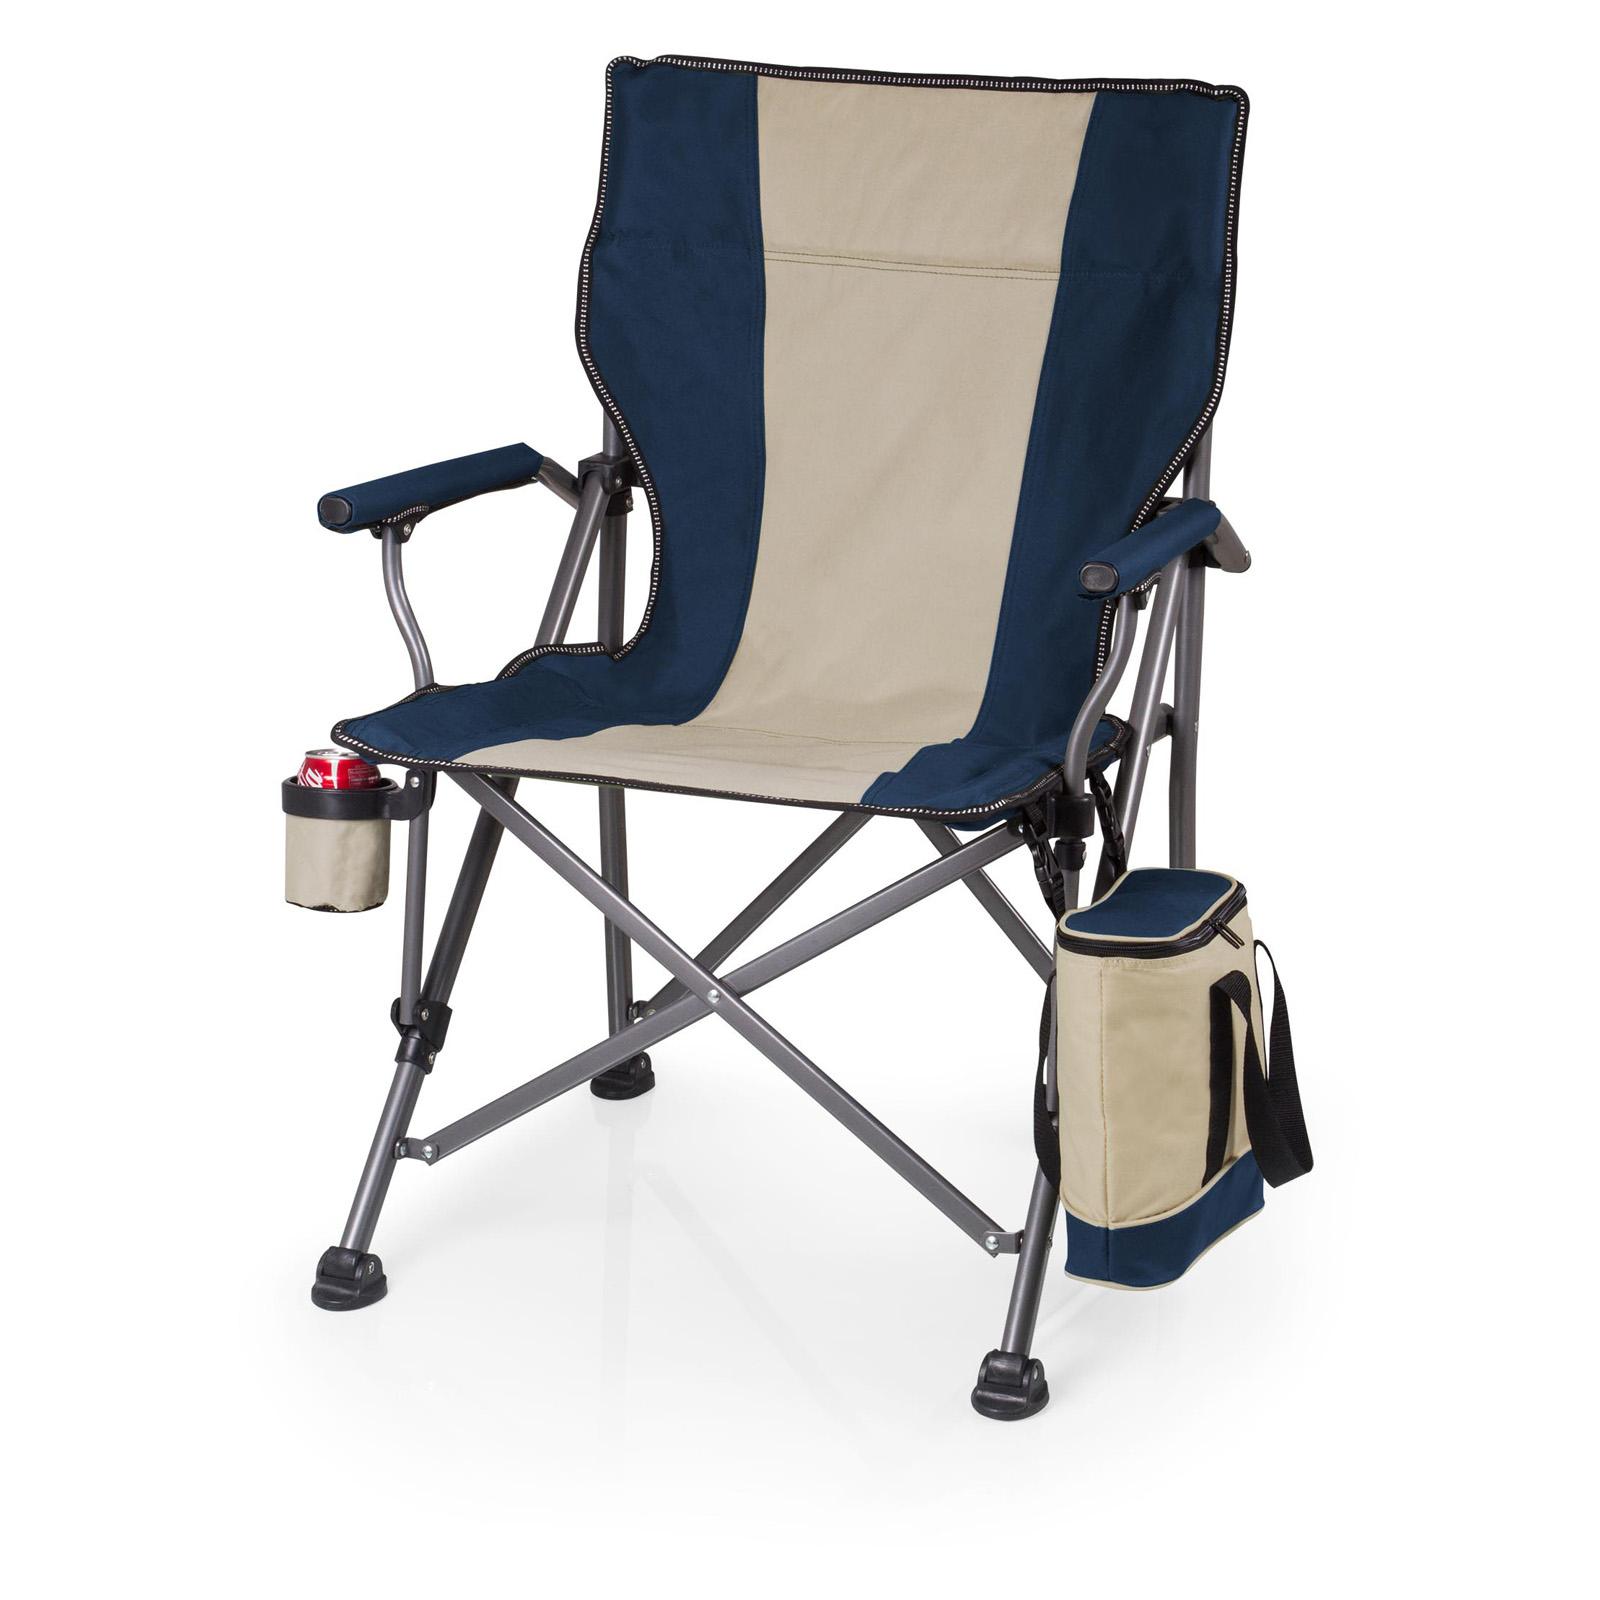 Picnic Time Outlander Camp Chair with Cooler 19.5